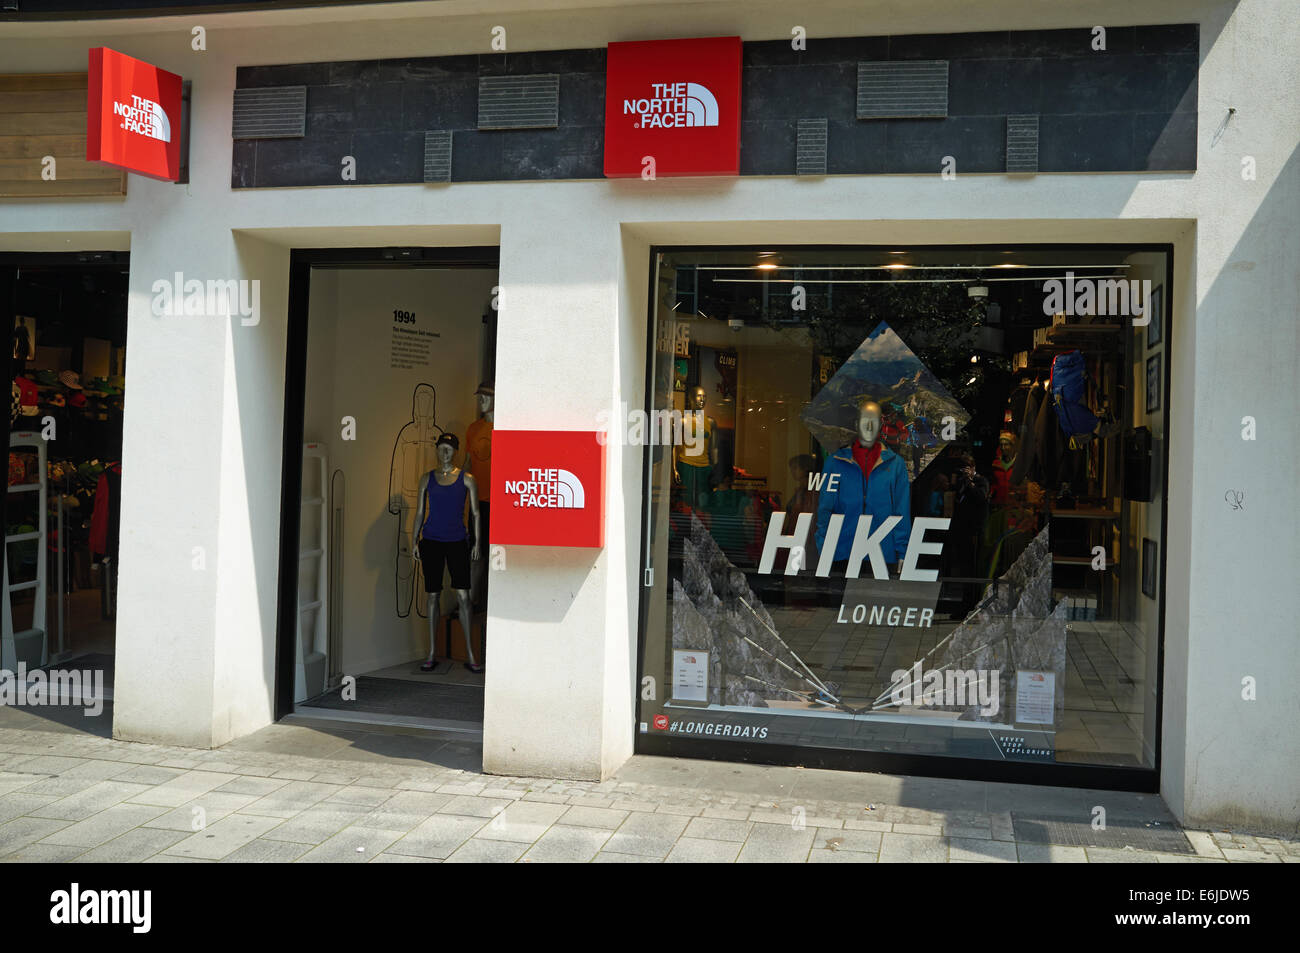 The North Face outdoor clothing store Dusseldorf Germany Stock Photo